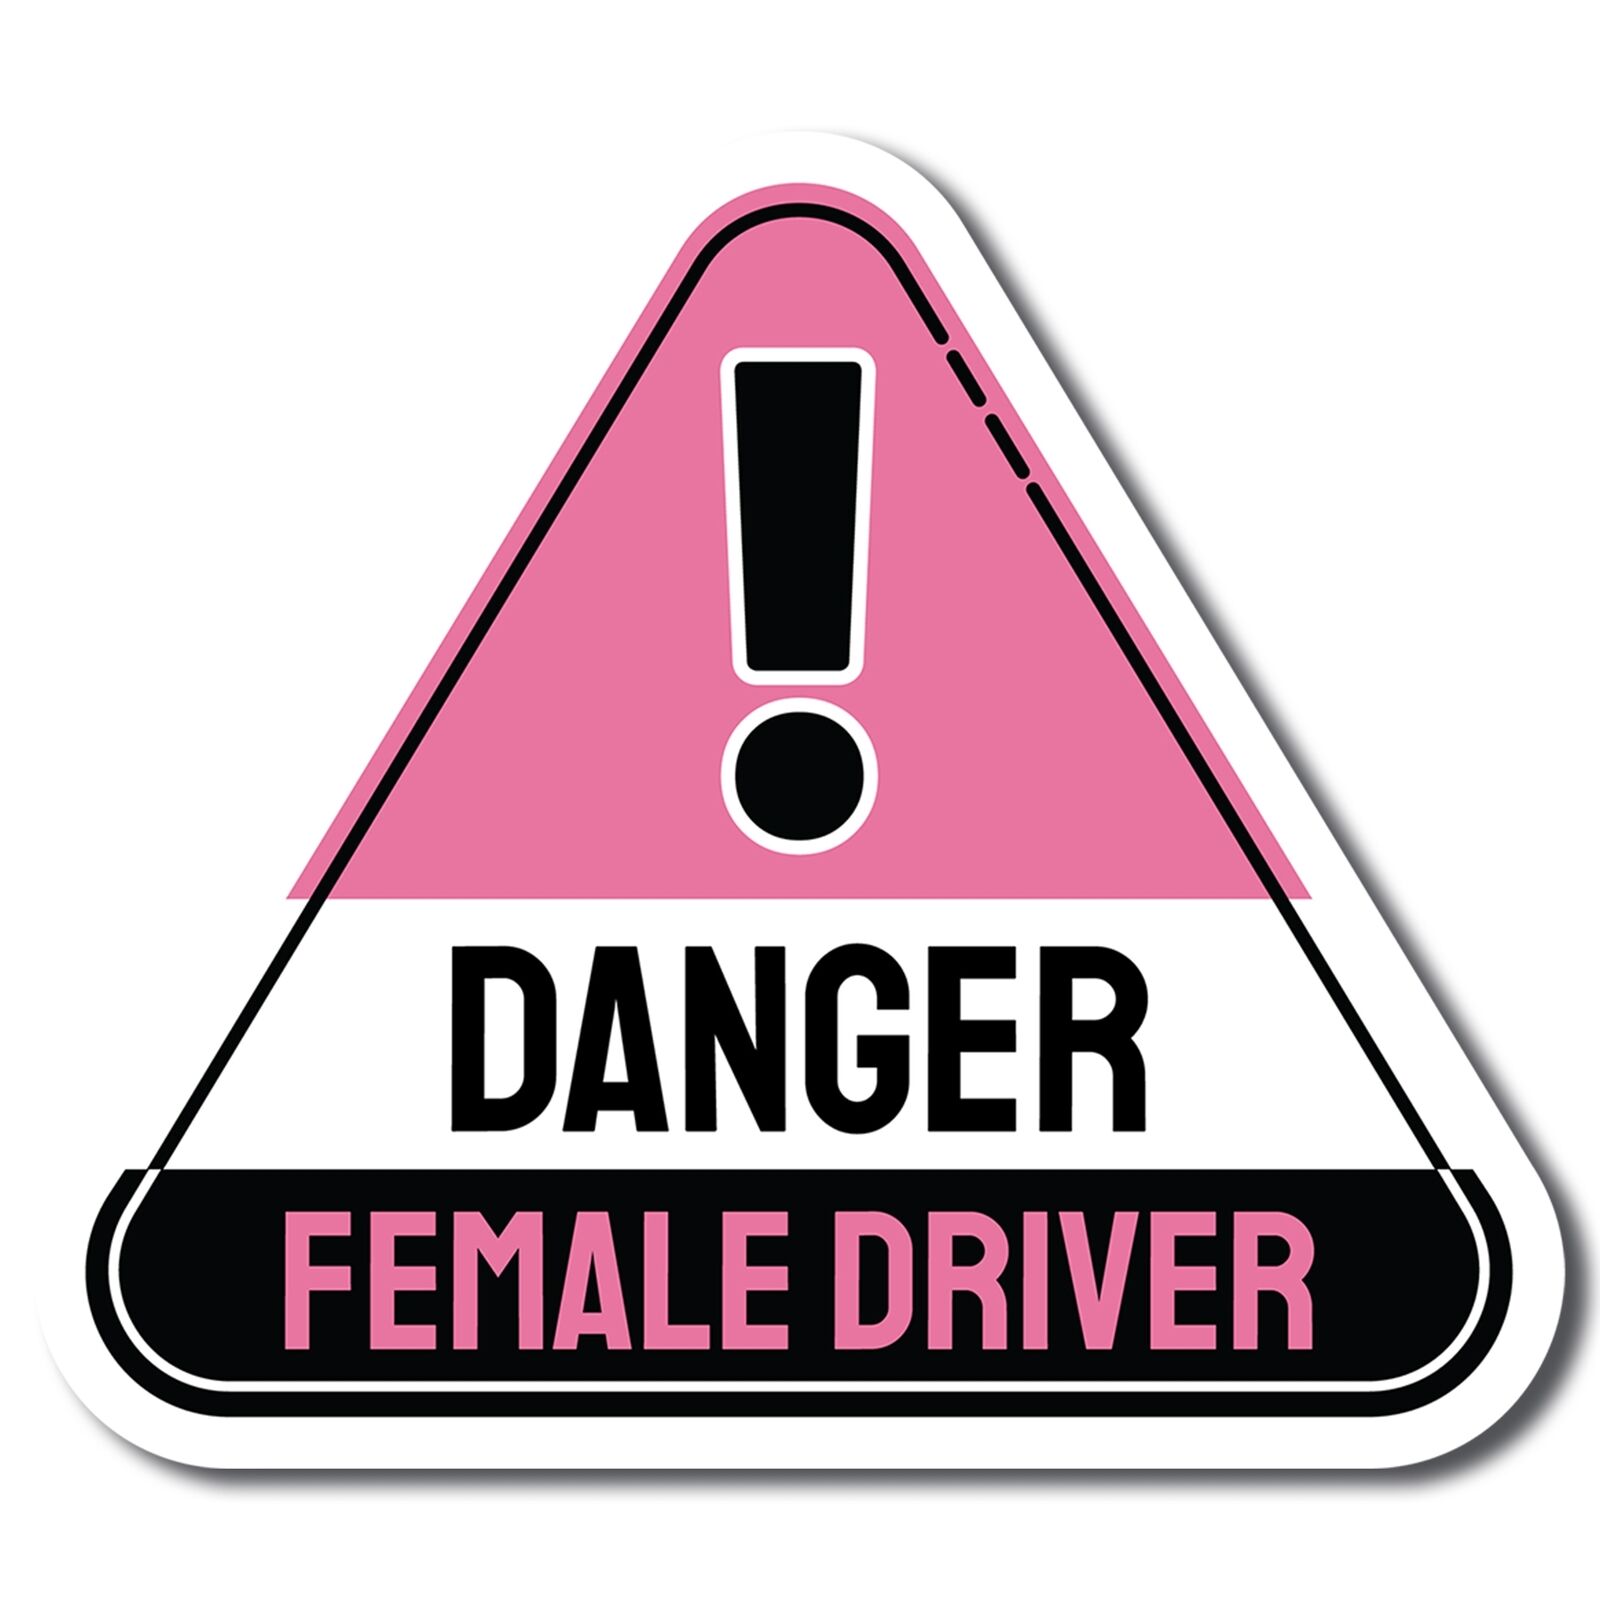 Magnet Me Up Danger Female Driver Magnet Decal, Pink and Black, Perfect for Car